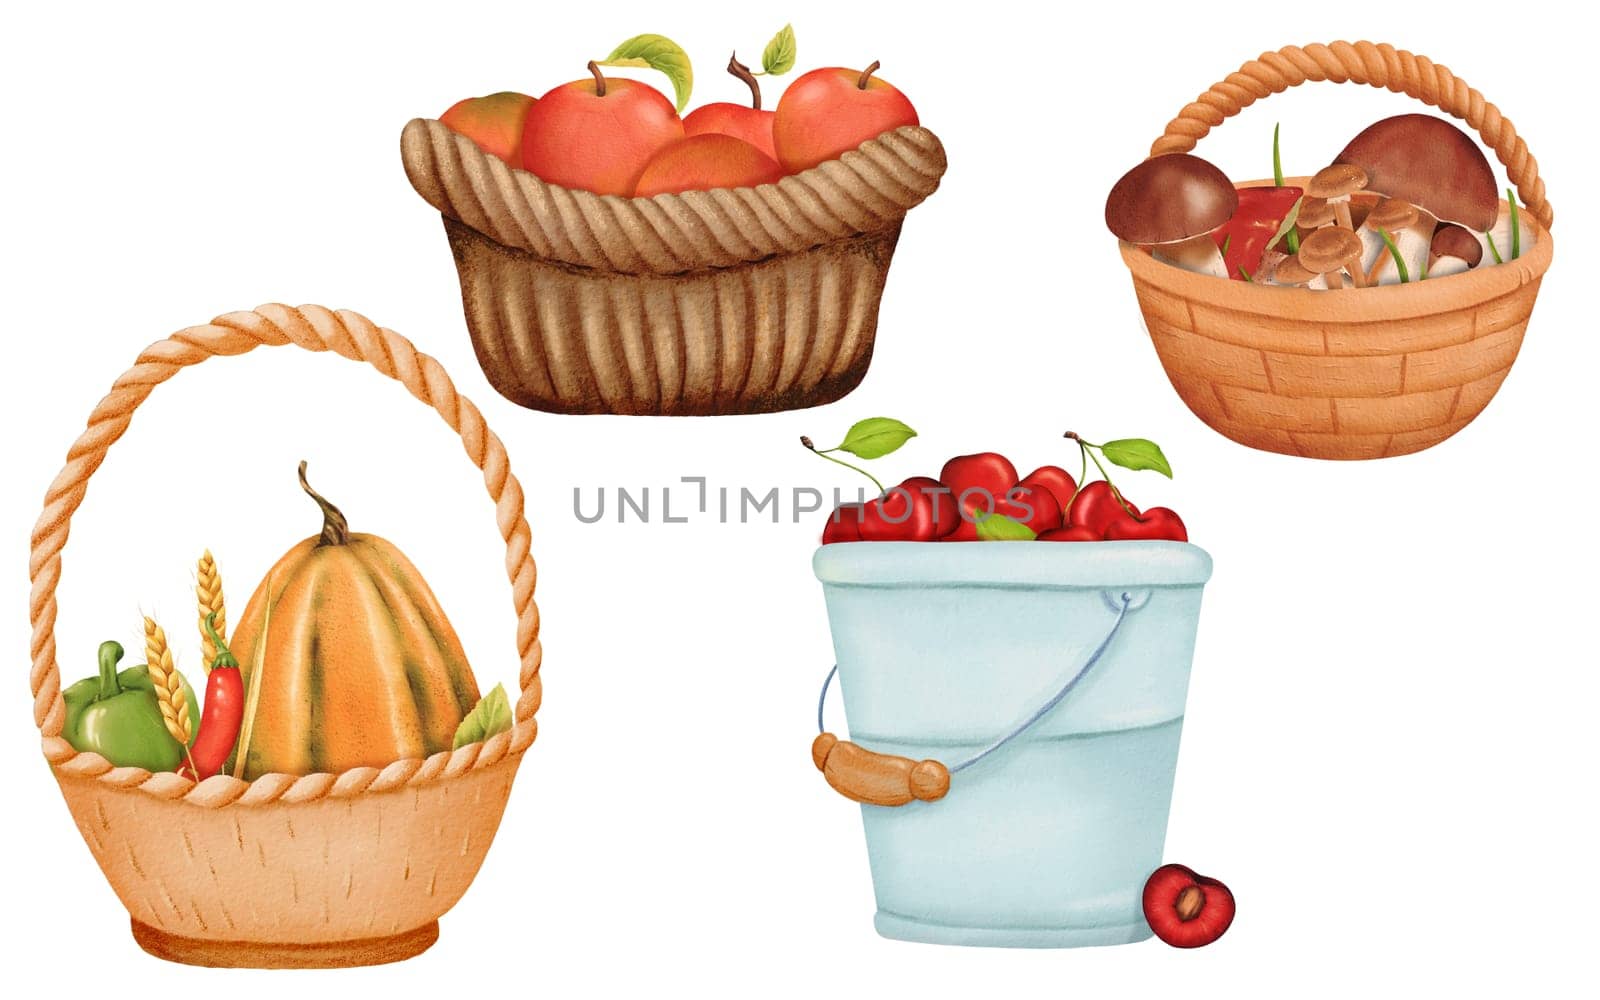 Watercolor harvest set. Baskets with fresh produce: rustic pumpkins, spicy peppers, delicate wheat sheaves, crisp apples, and fresh forest mushrooms - white mushrooms and slippery jacks. ripe cherries.